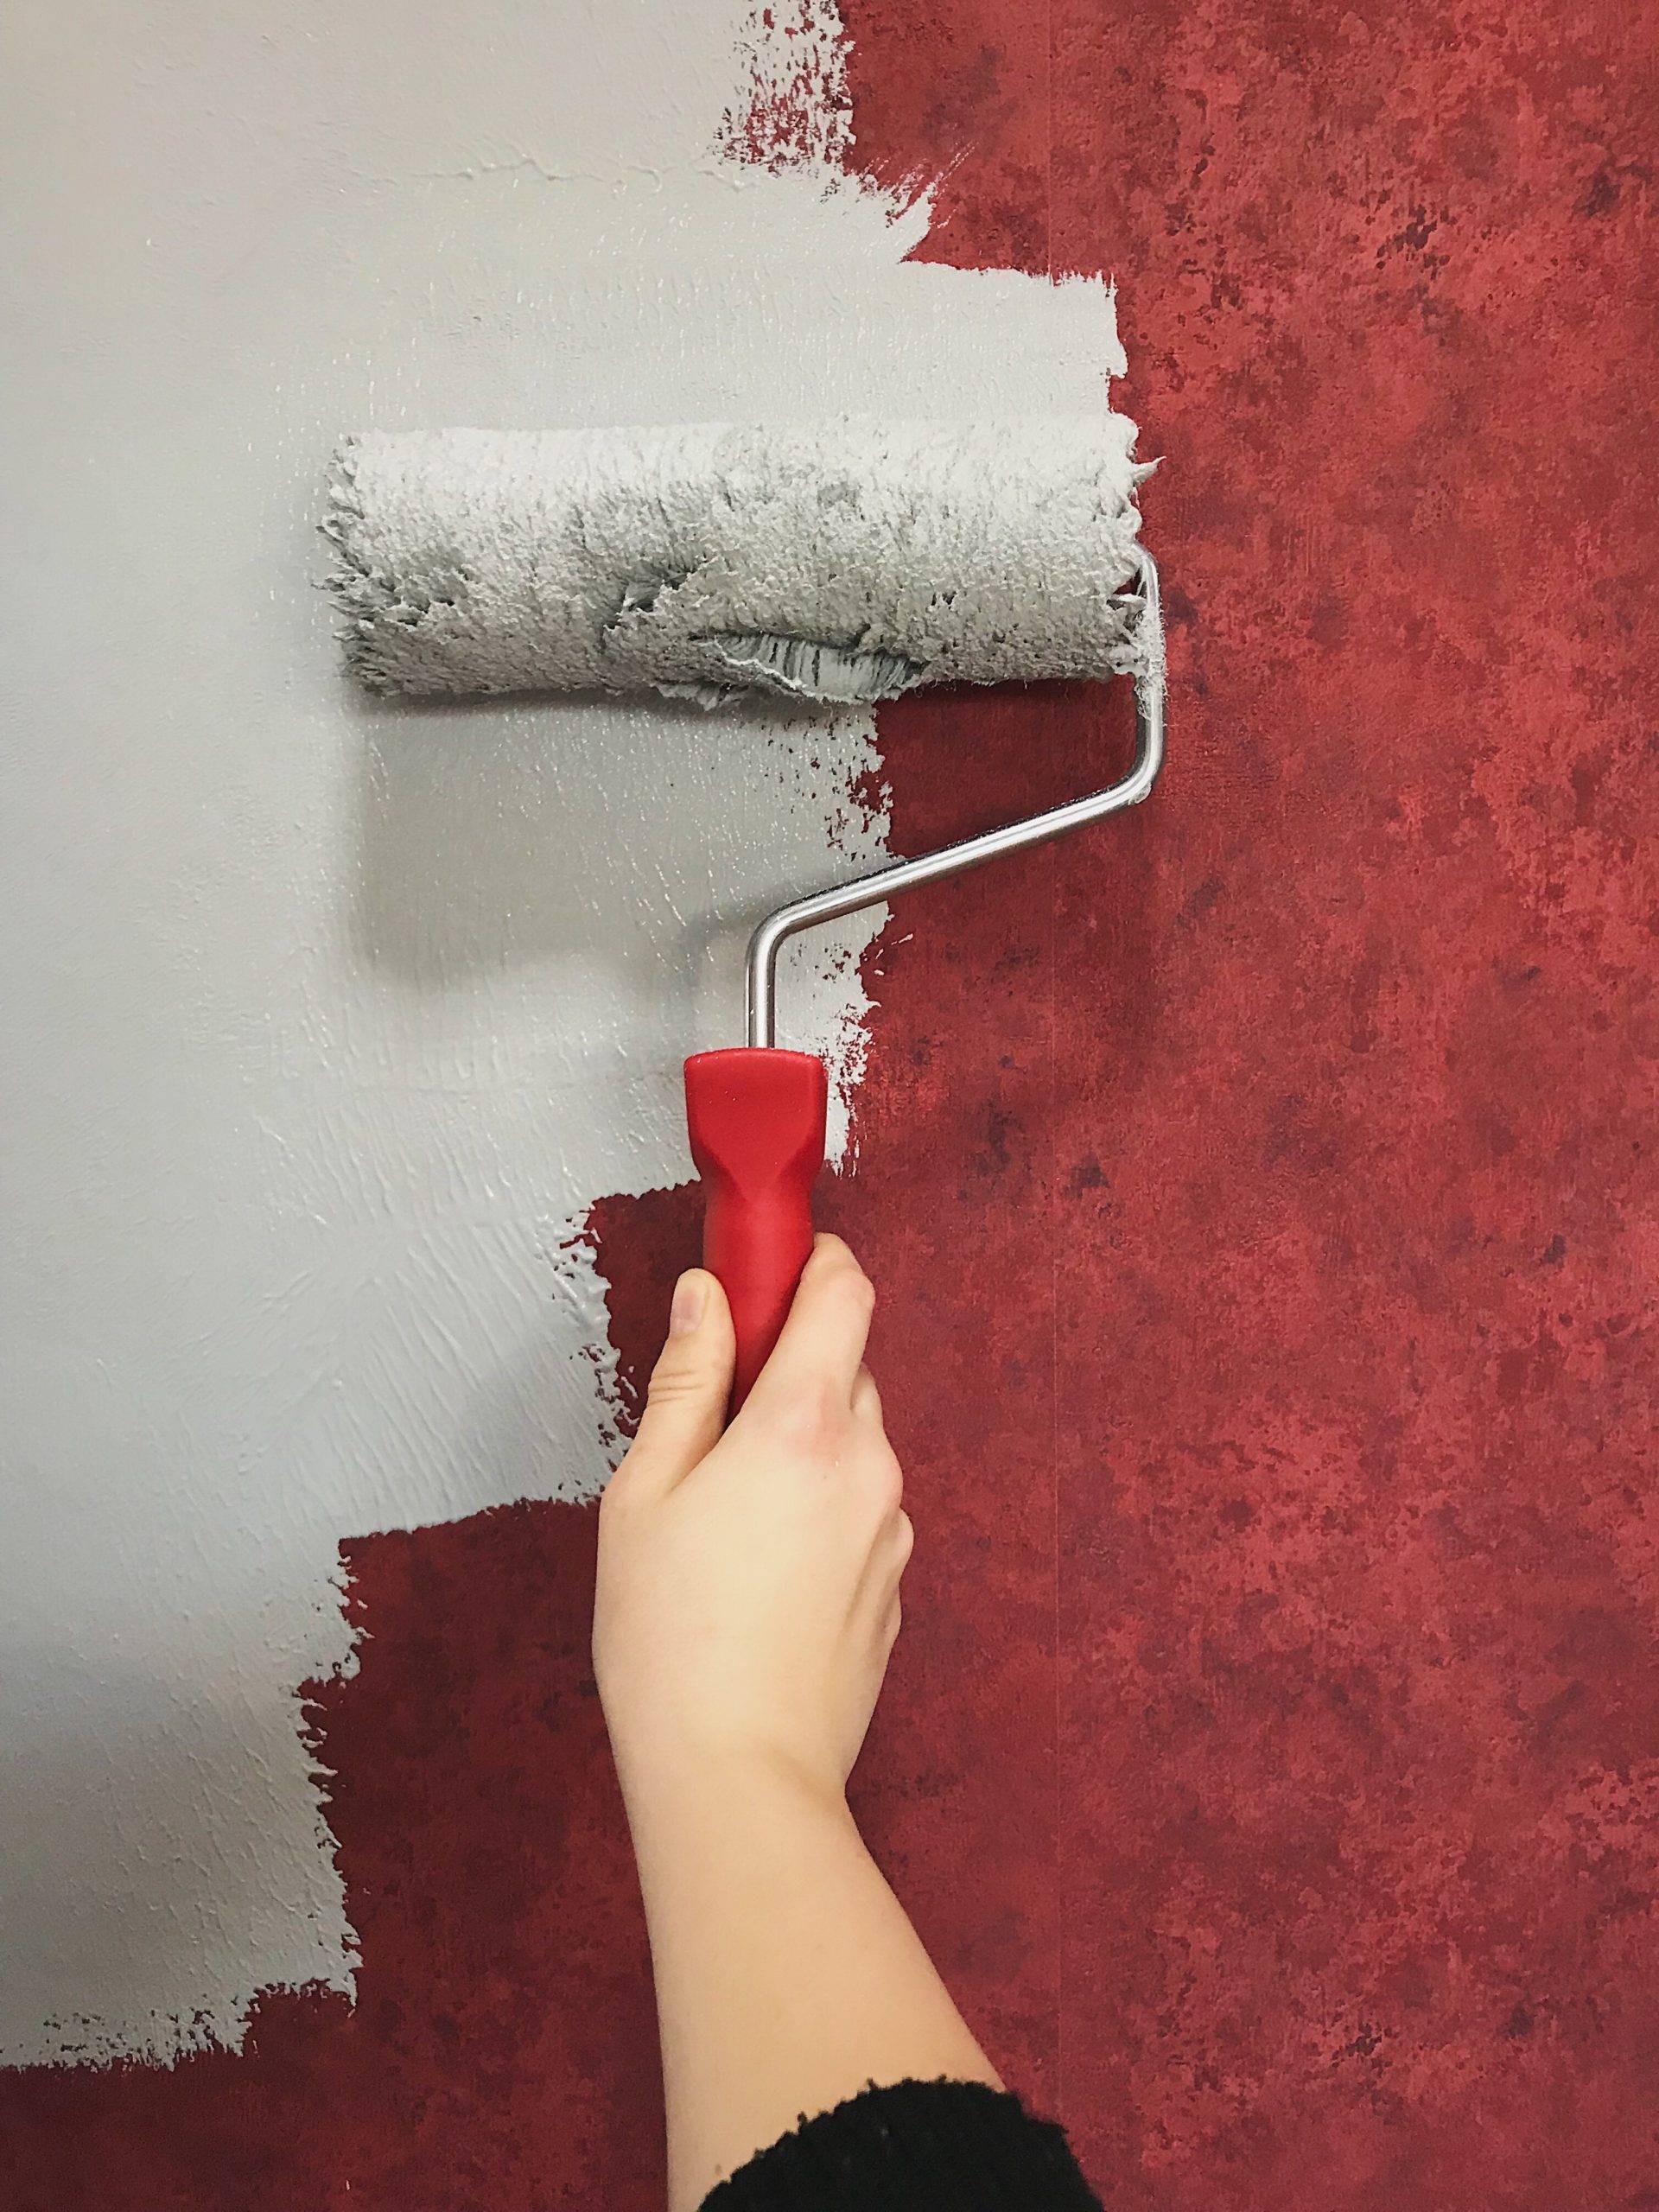 How to Dispose of Wallpaper Adhesive